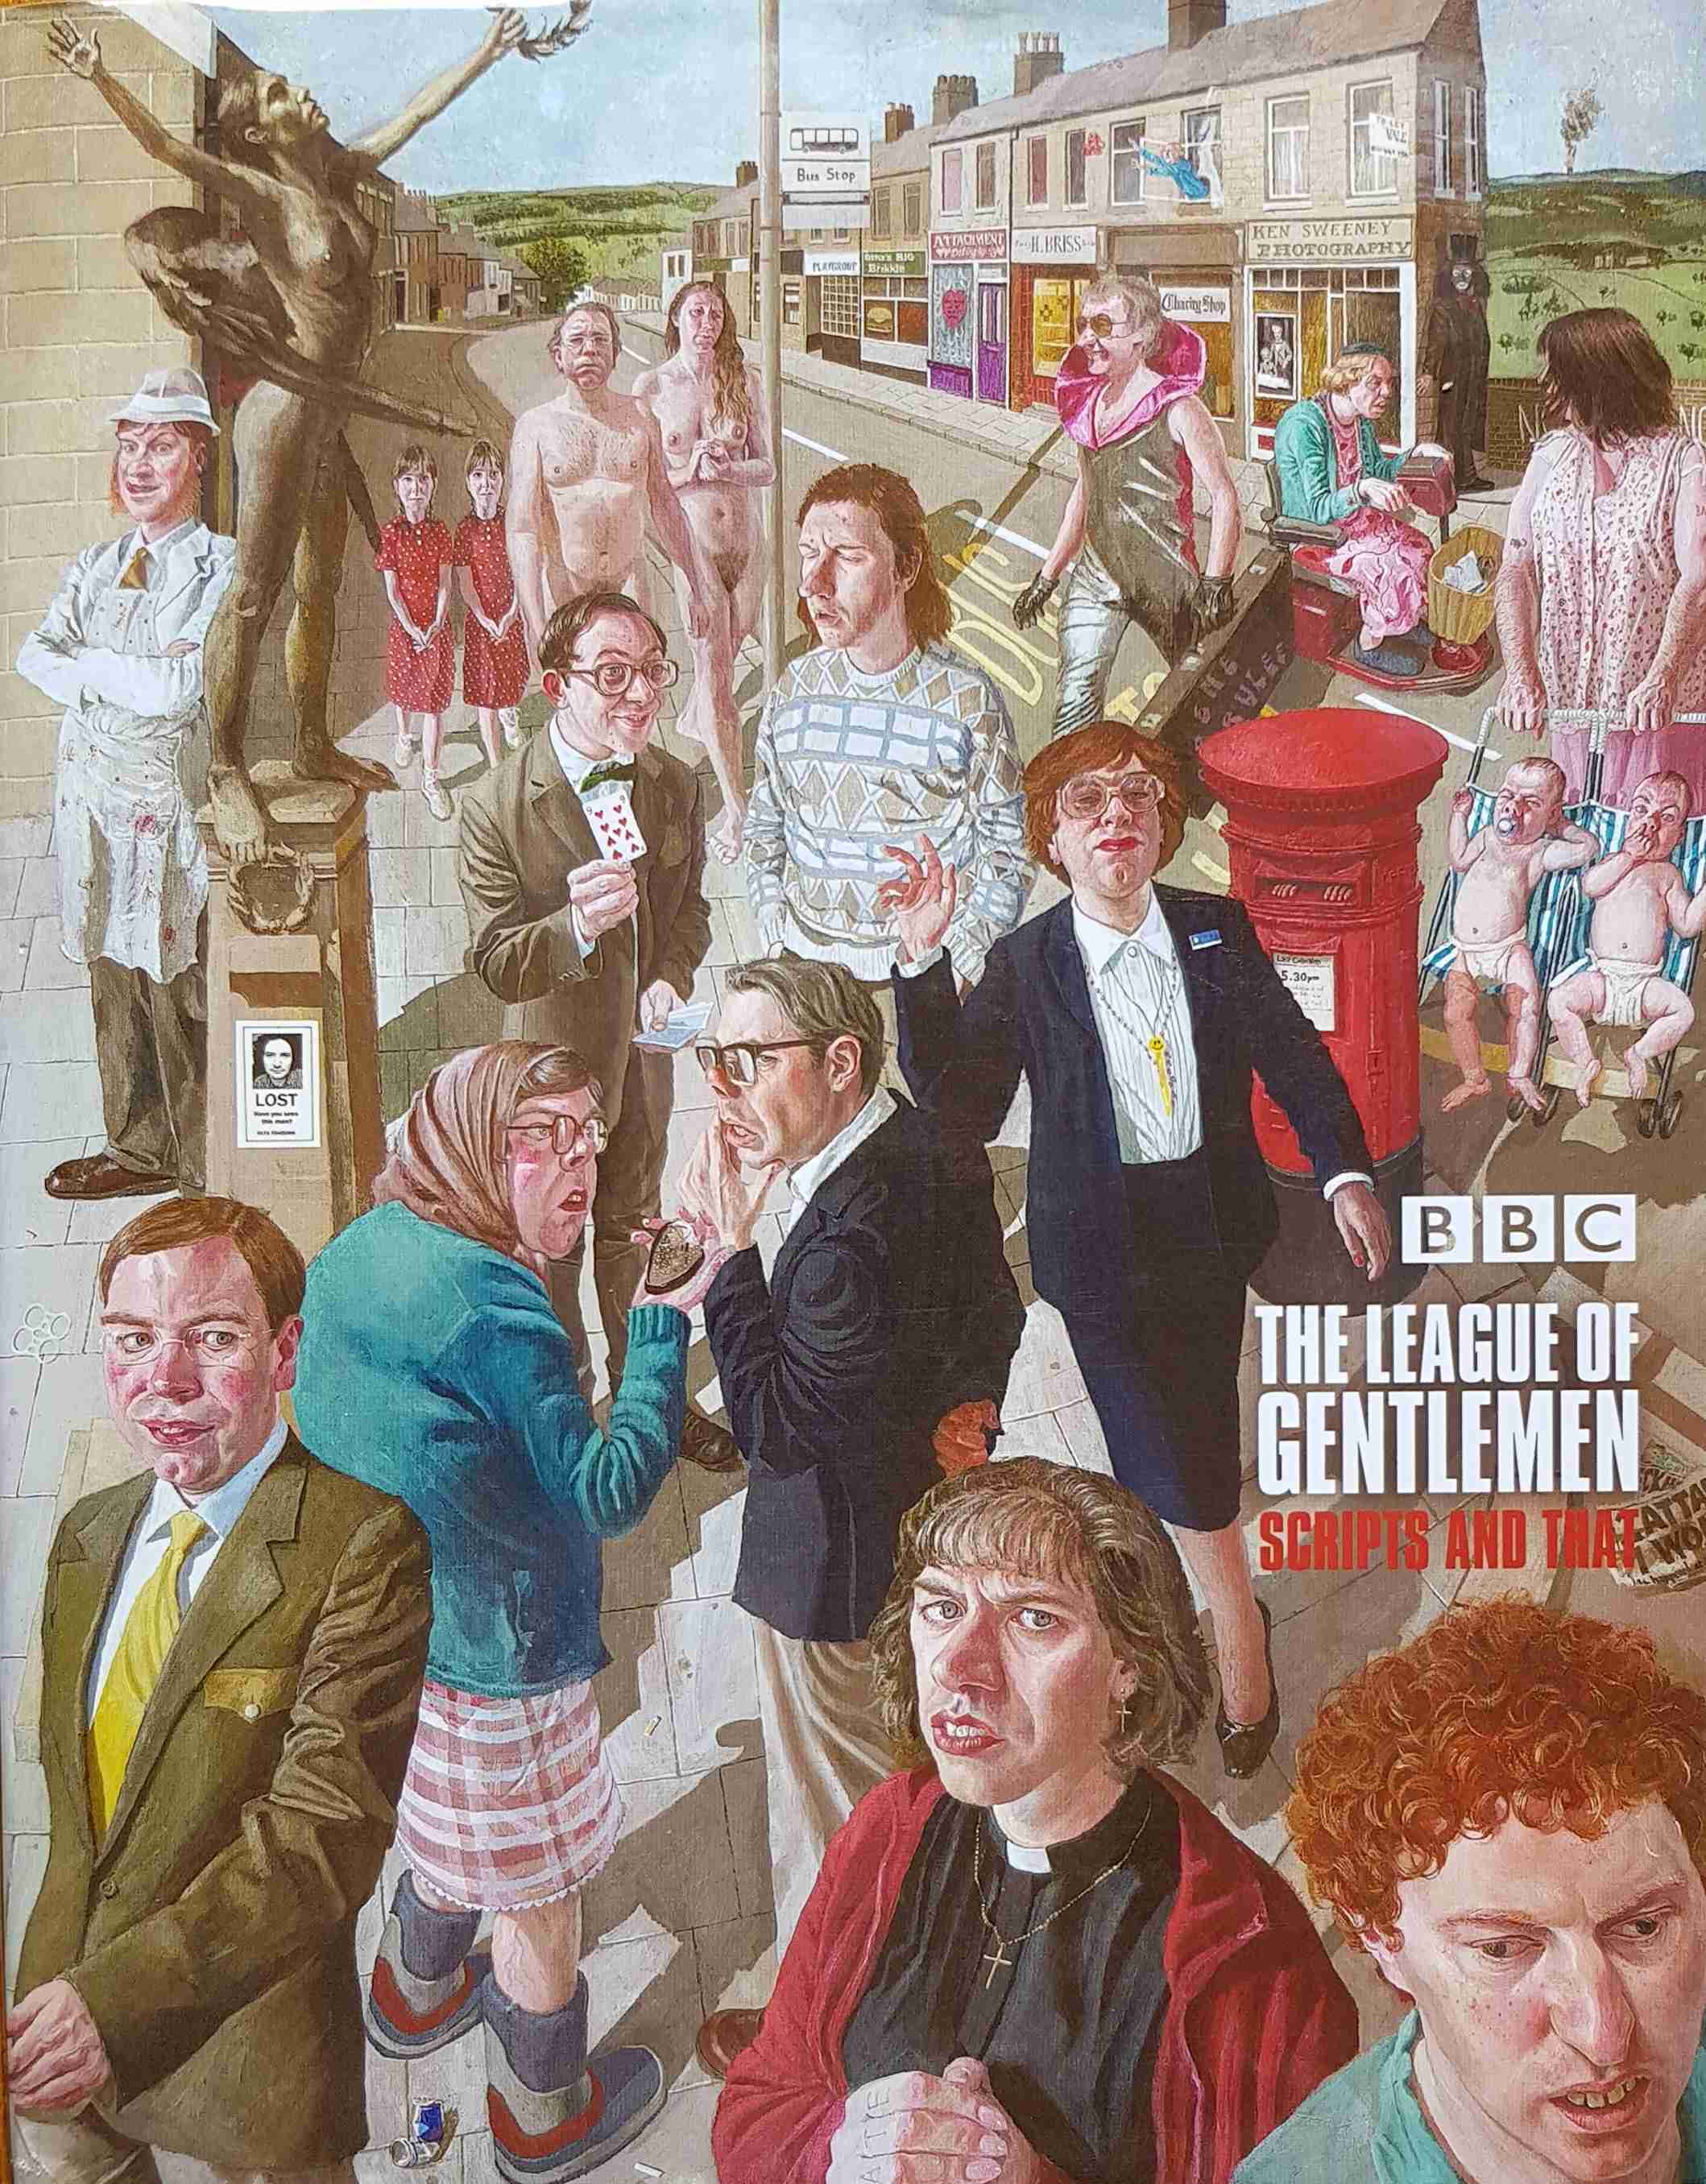 Picture of The league of gentlemen - Scripts and that by artist Jeremy Dyson / Mark Gatiss / Steve Pemberton / Reece Shearsmith from the BBC books - Records and Tapes library